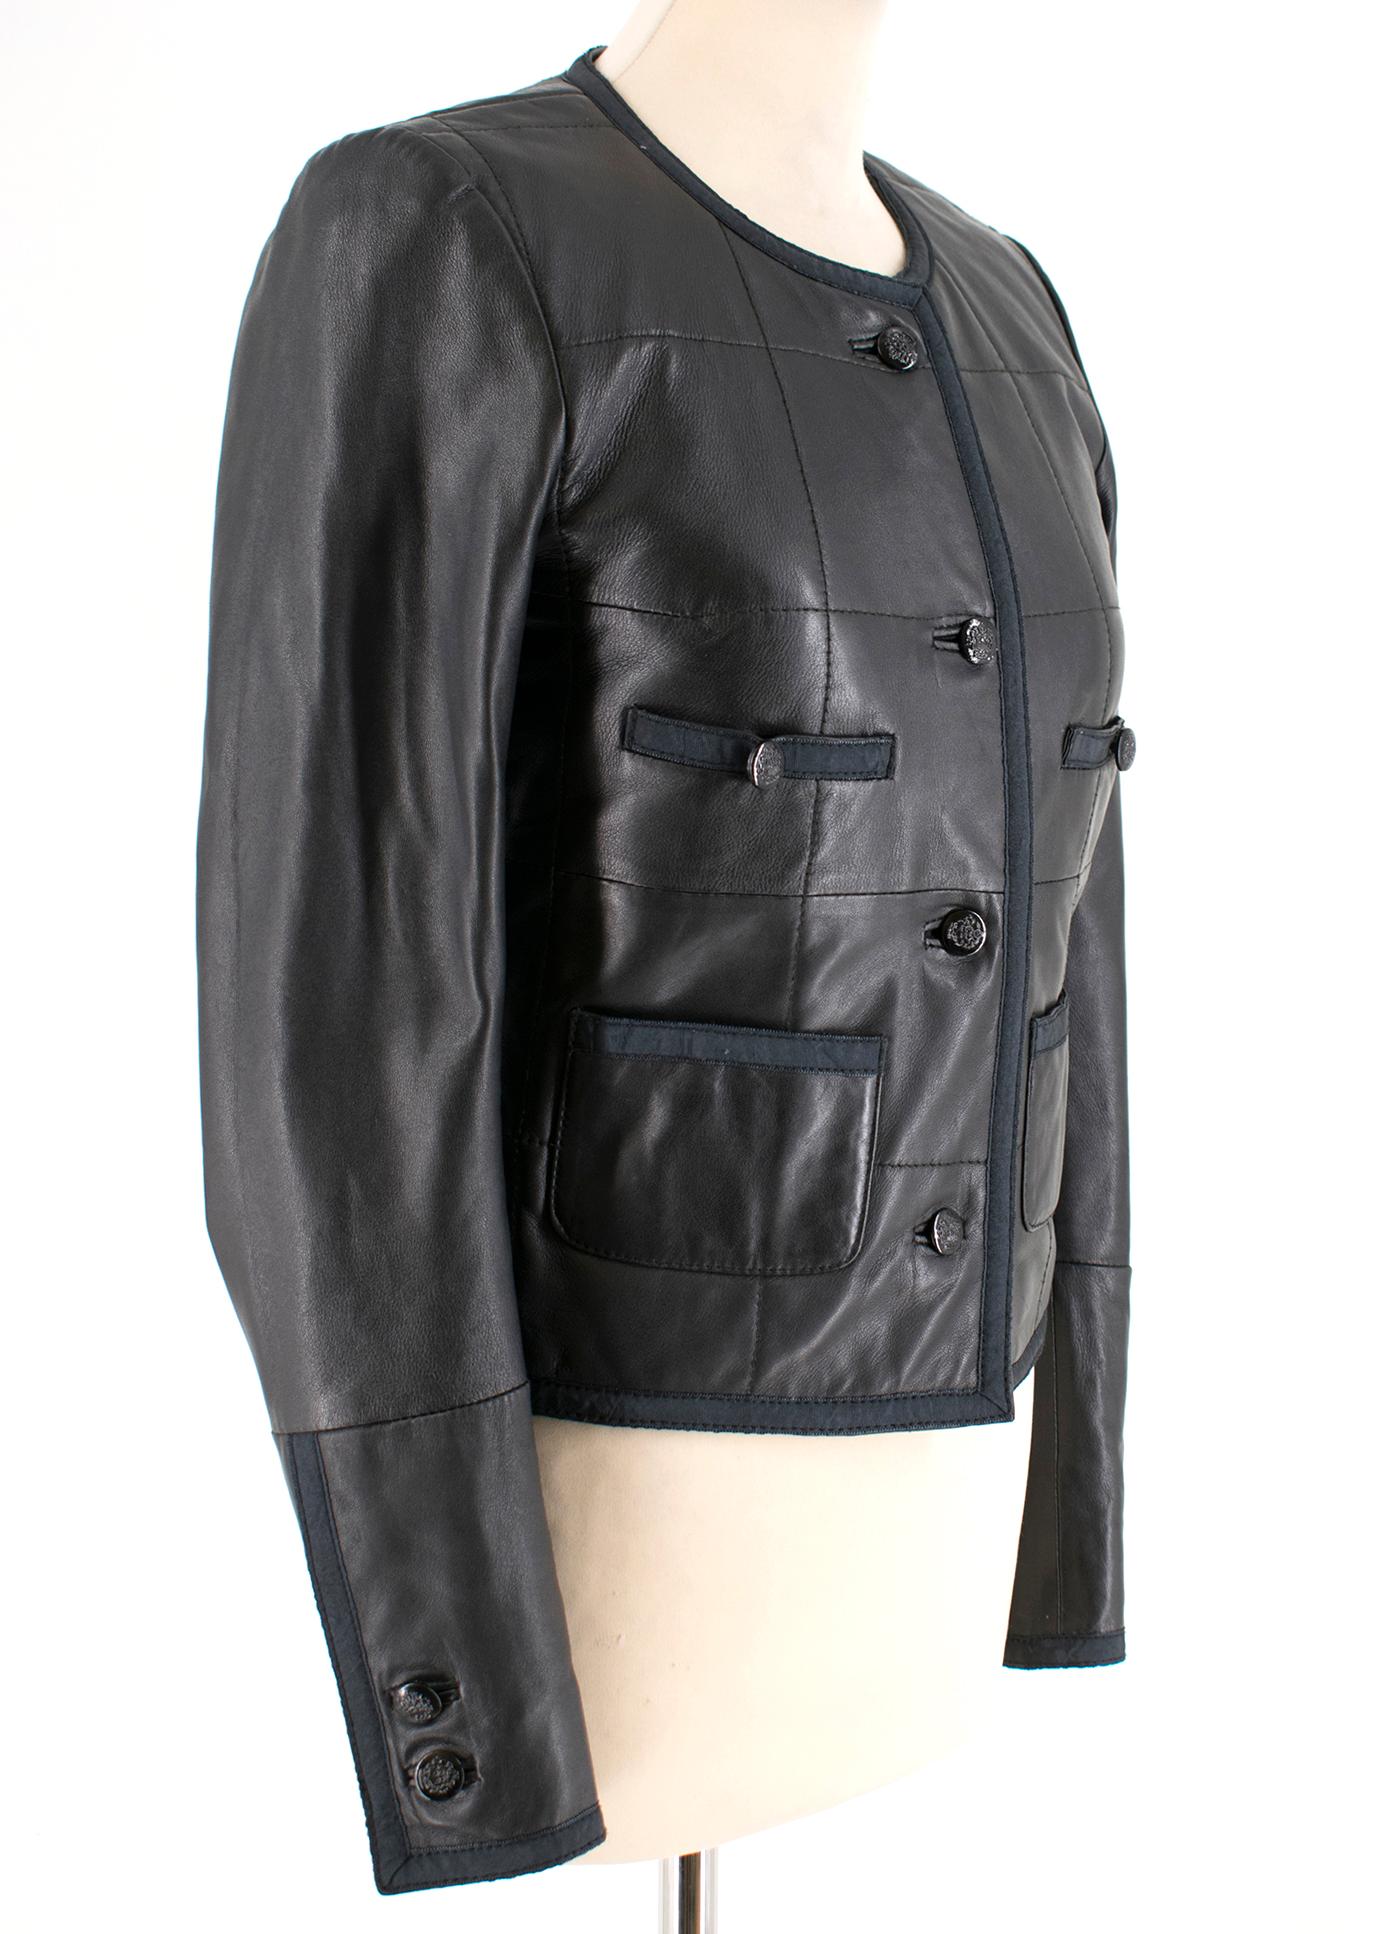 Maje Leather Textured Jacket with two pockets in the front and button fastening 

Please note, these items are pre-owned and may show signs of being stored even when unworn and unused. This is reflected within the significantly reduced price. Please